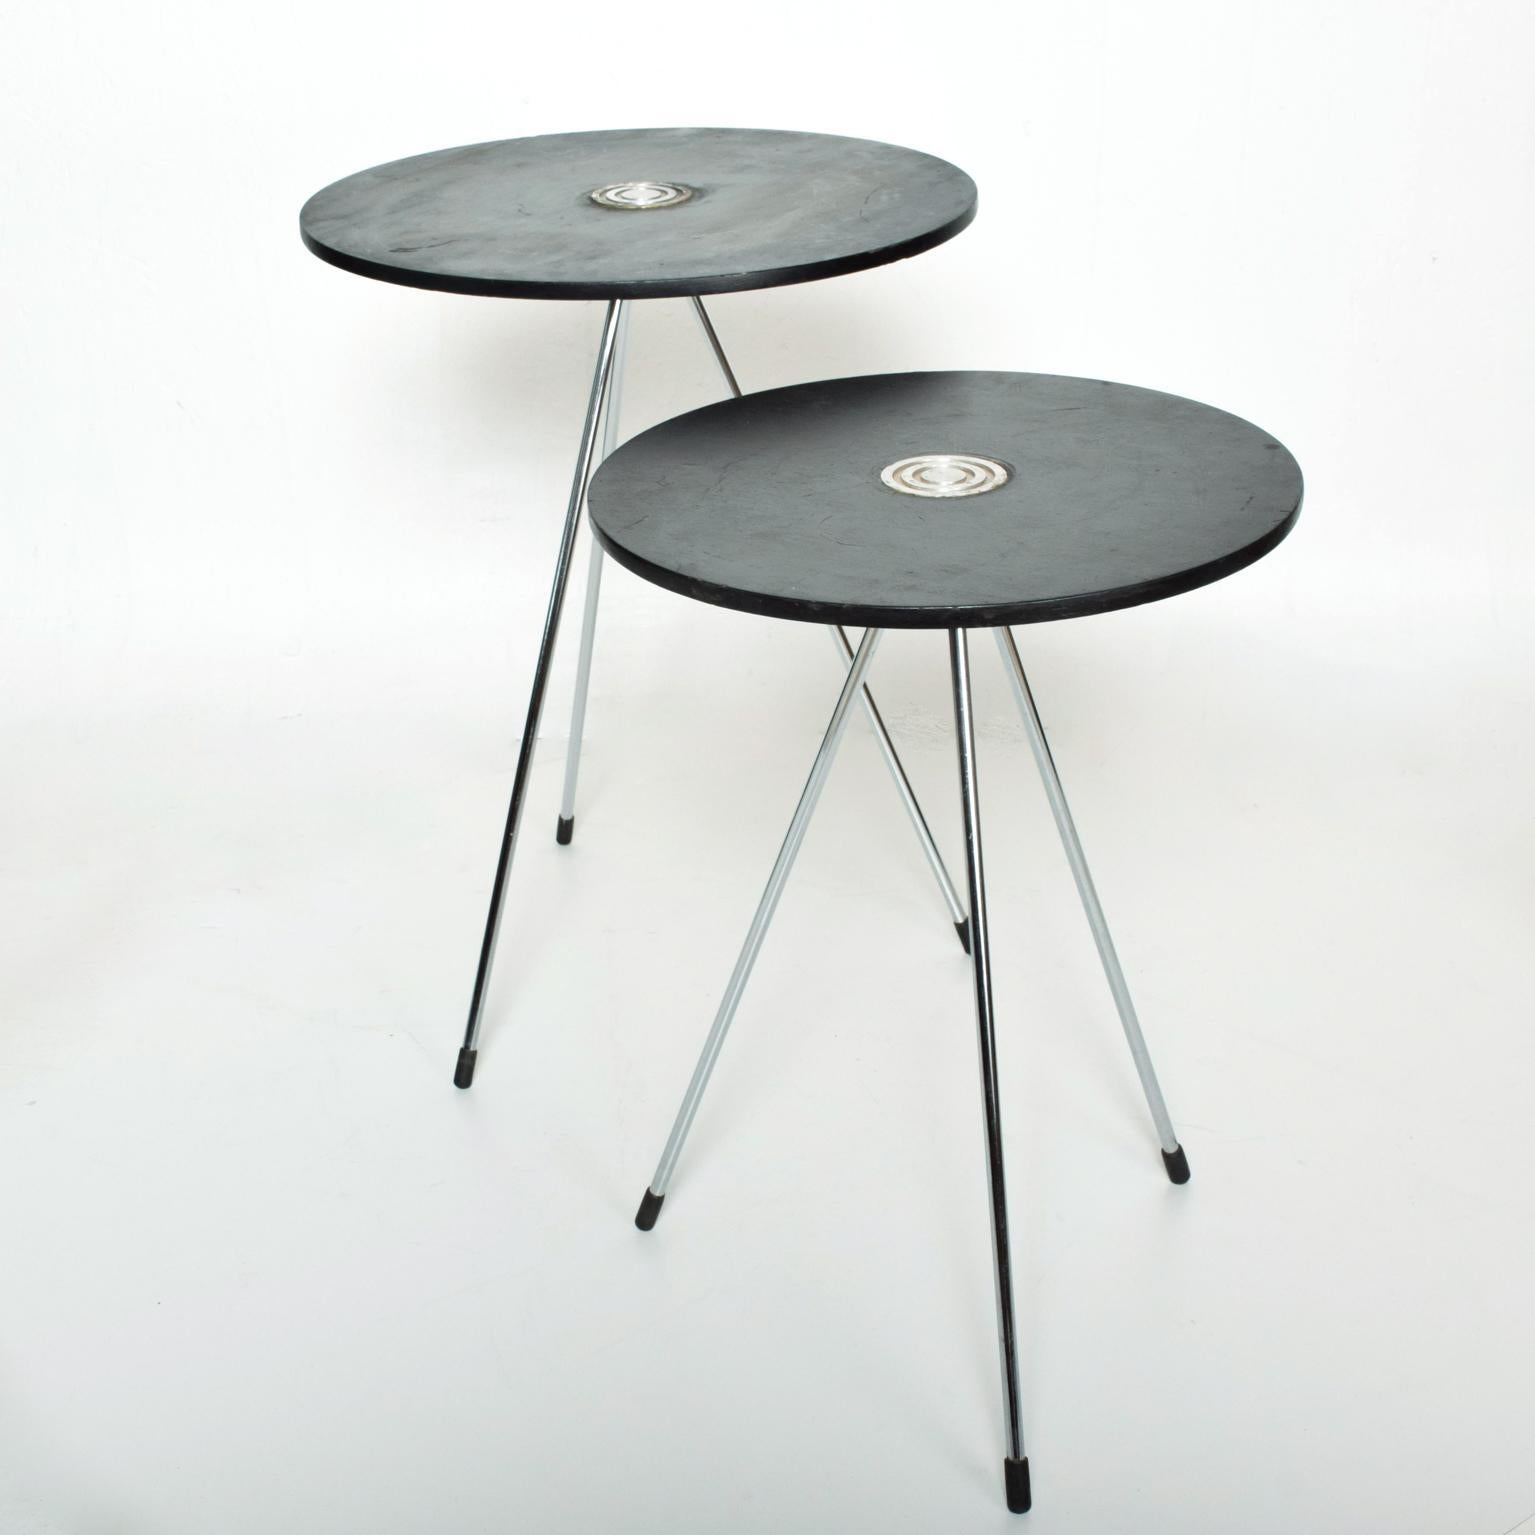 Late 20th Century Mid-Century Modern Mexican Round Nesting Tables in Black